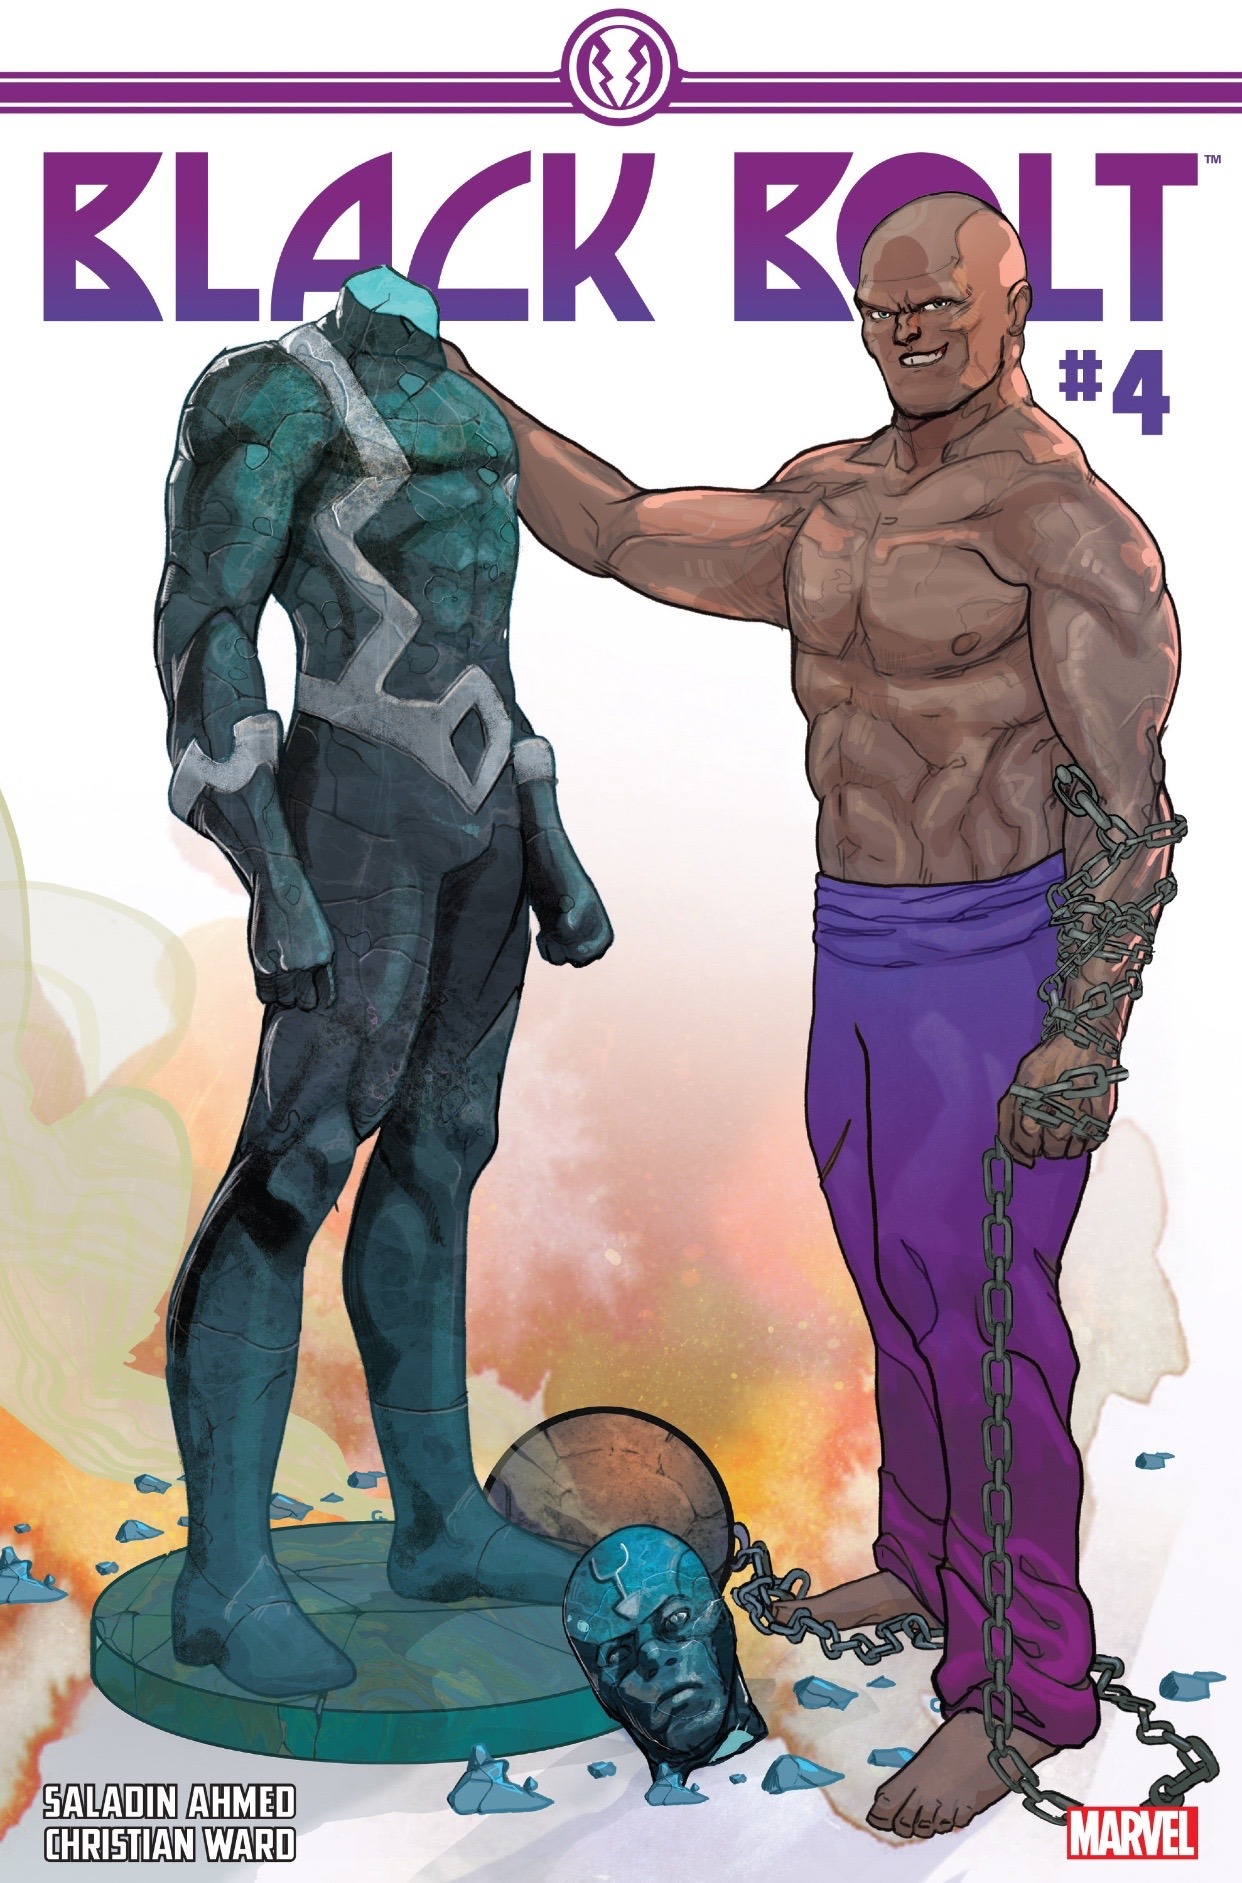 Black Bolt #4 Reviewspoilers spoilers spoilers spoilers spoilers spoilers spoilers spoilers spoilersAnother fantastic installment from the creative team of writer, Saladin Ahmed, and artist, Christian Ward, that switches narrative gears for a truly...